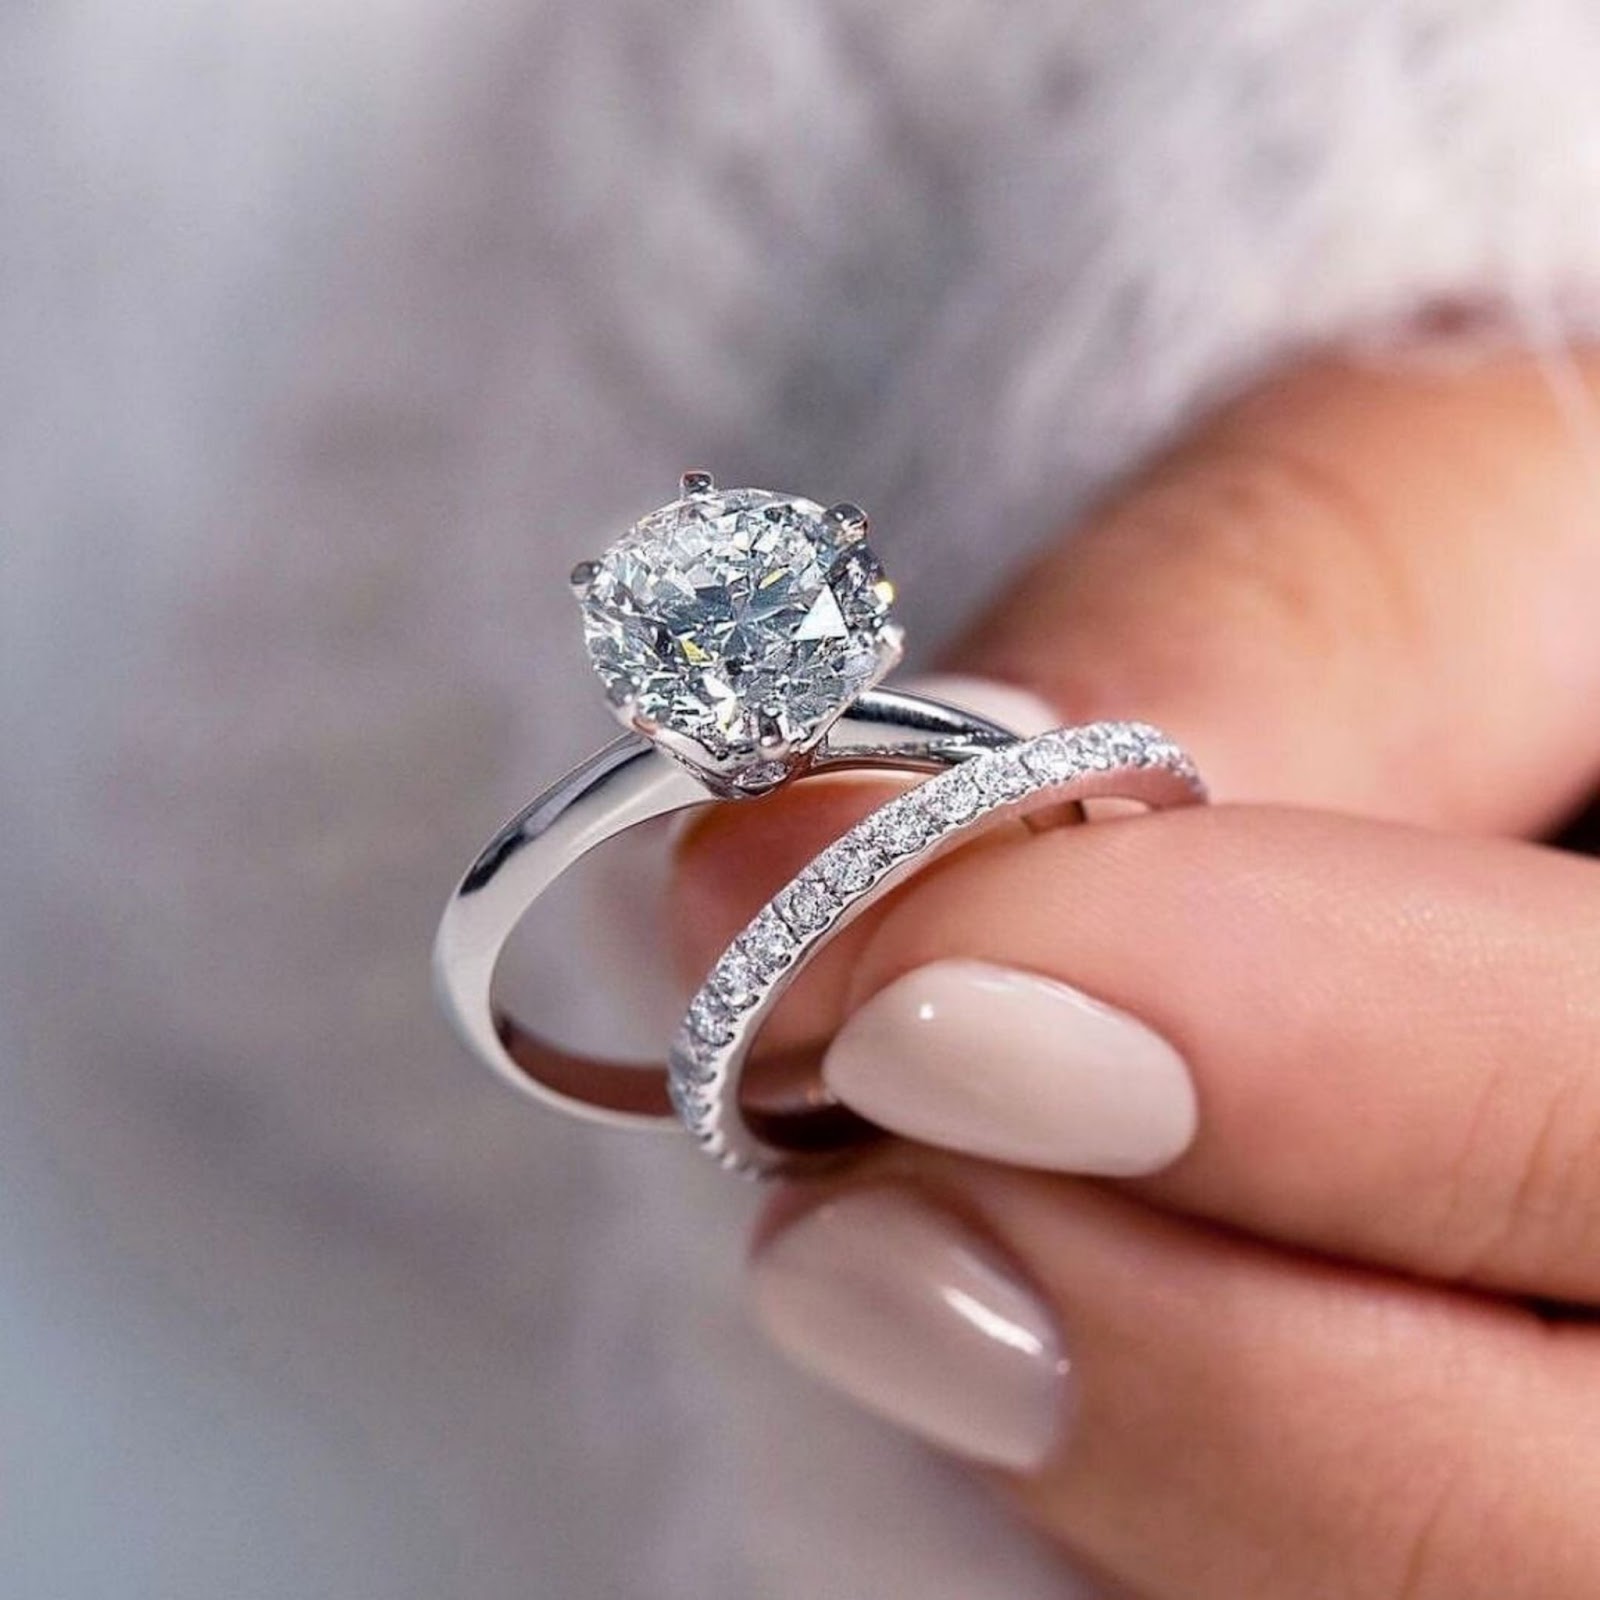 Close-up of hands buying an engagement ring